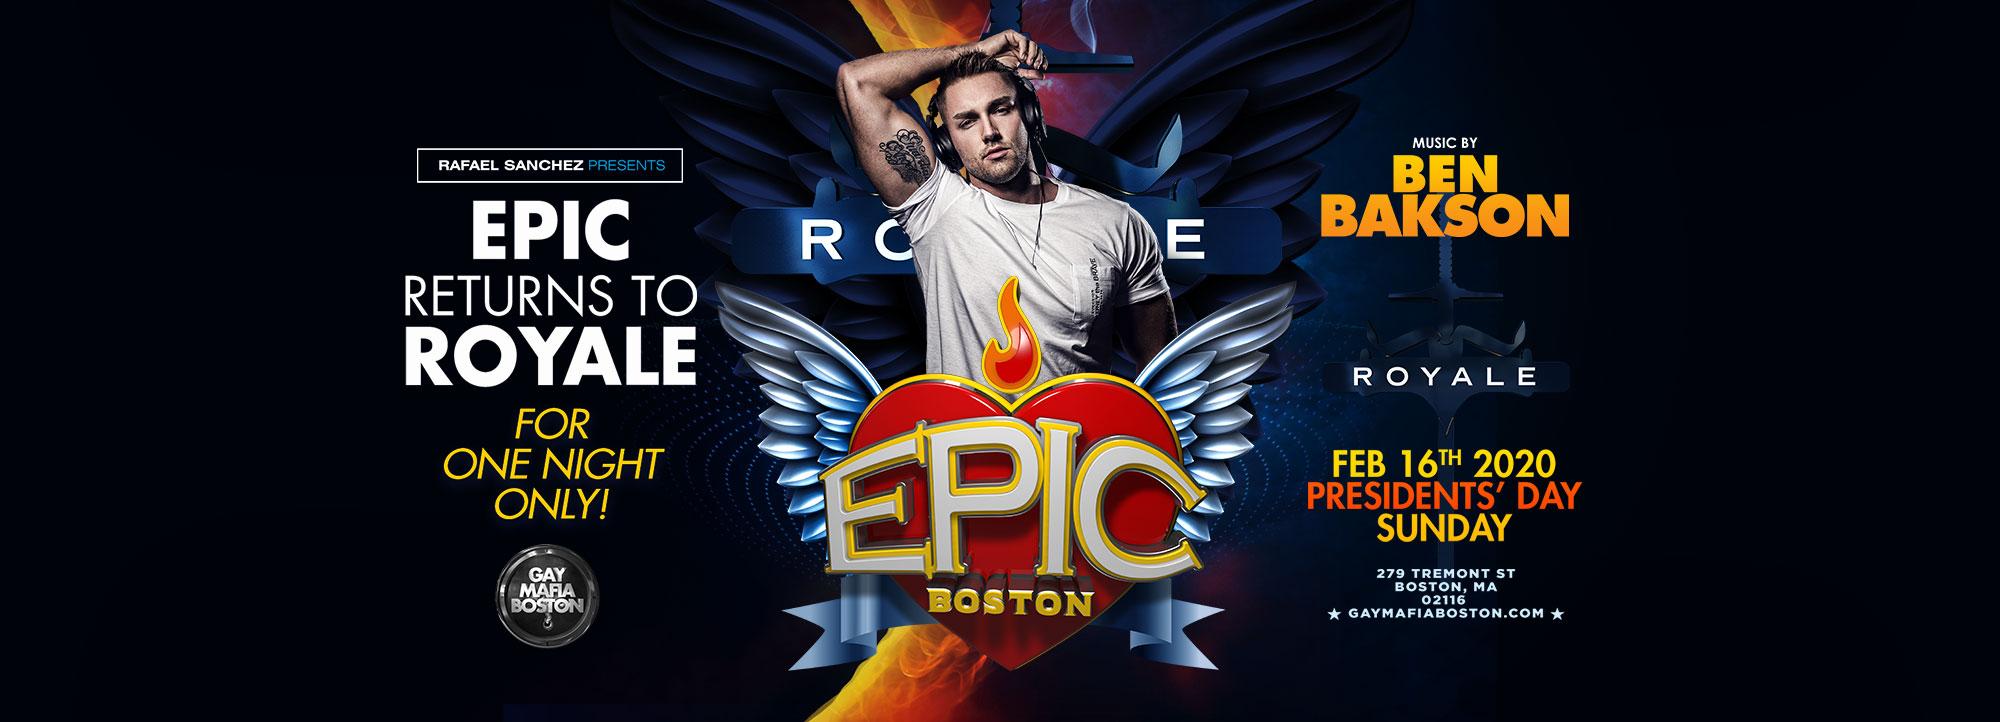 Epic Returns for One Night Only!